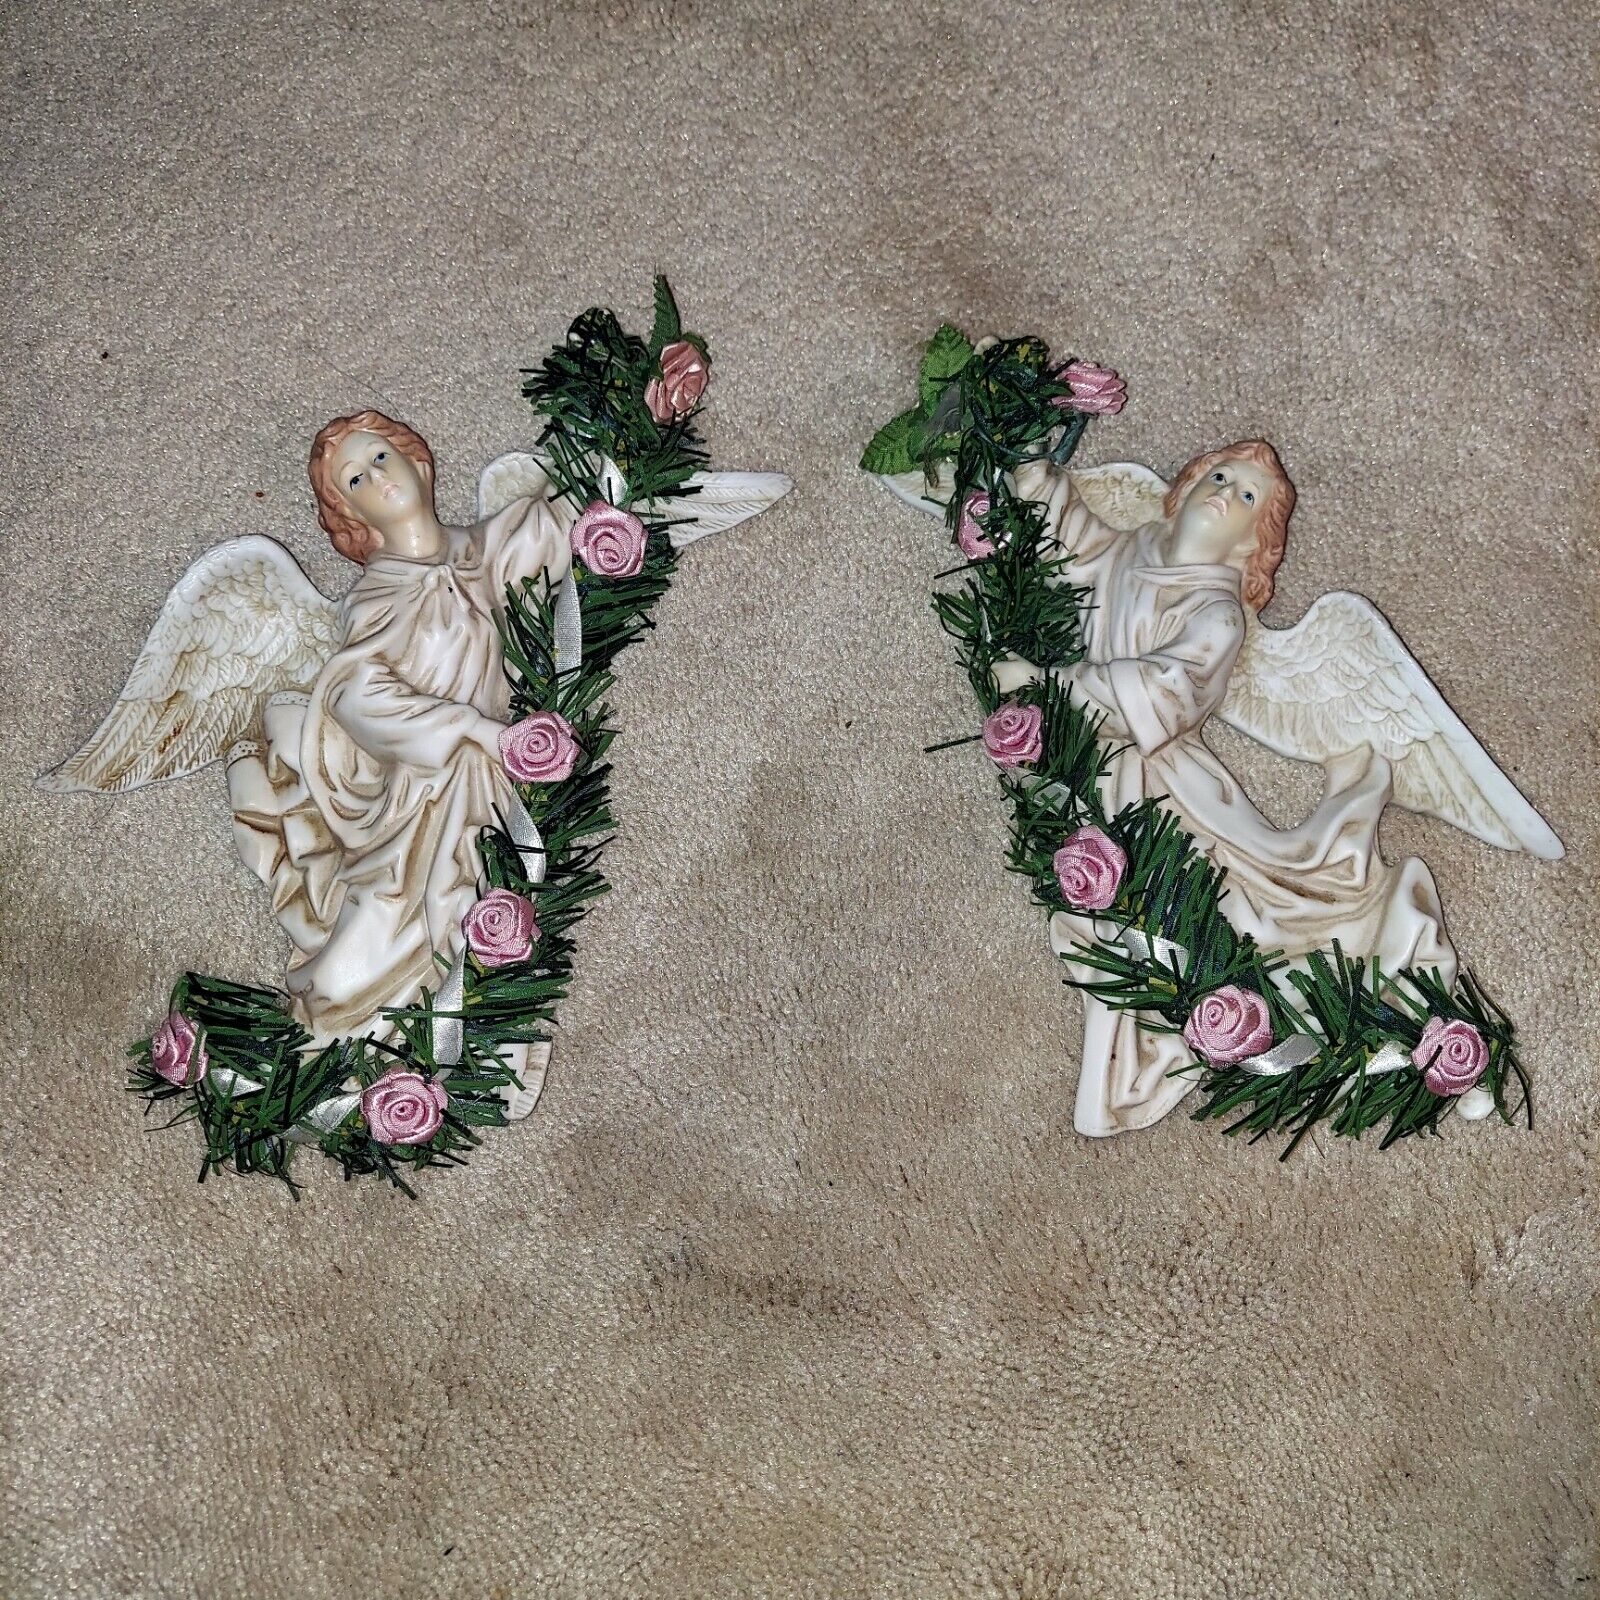 Vtg. Midwest Importer Ceramic Wall Plaques 2 Flying Angels w/Pink Rose Sachet